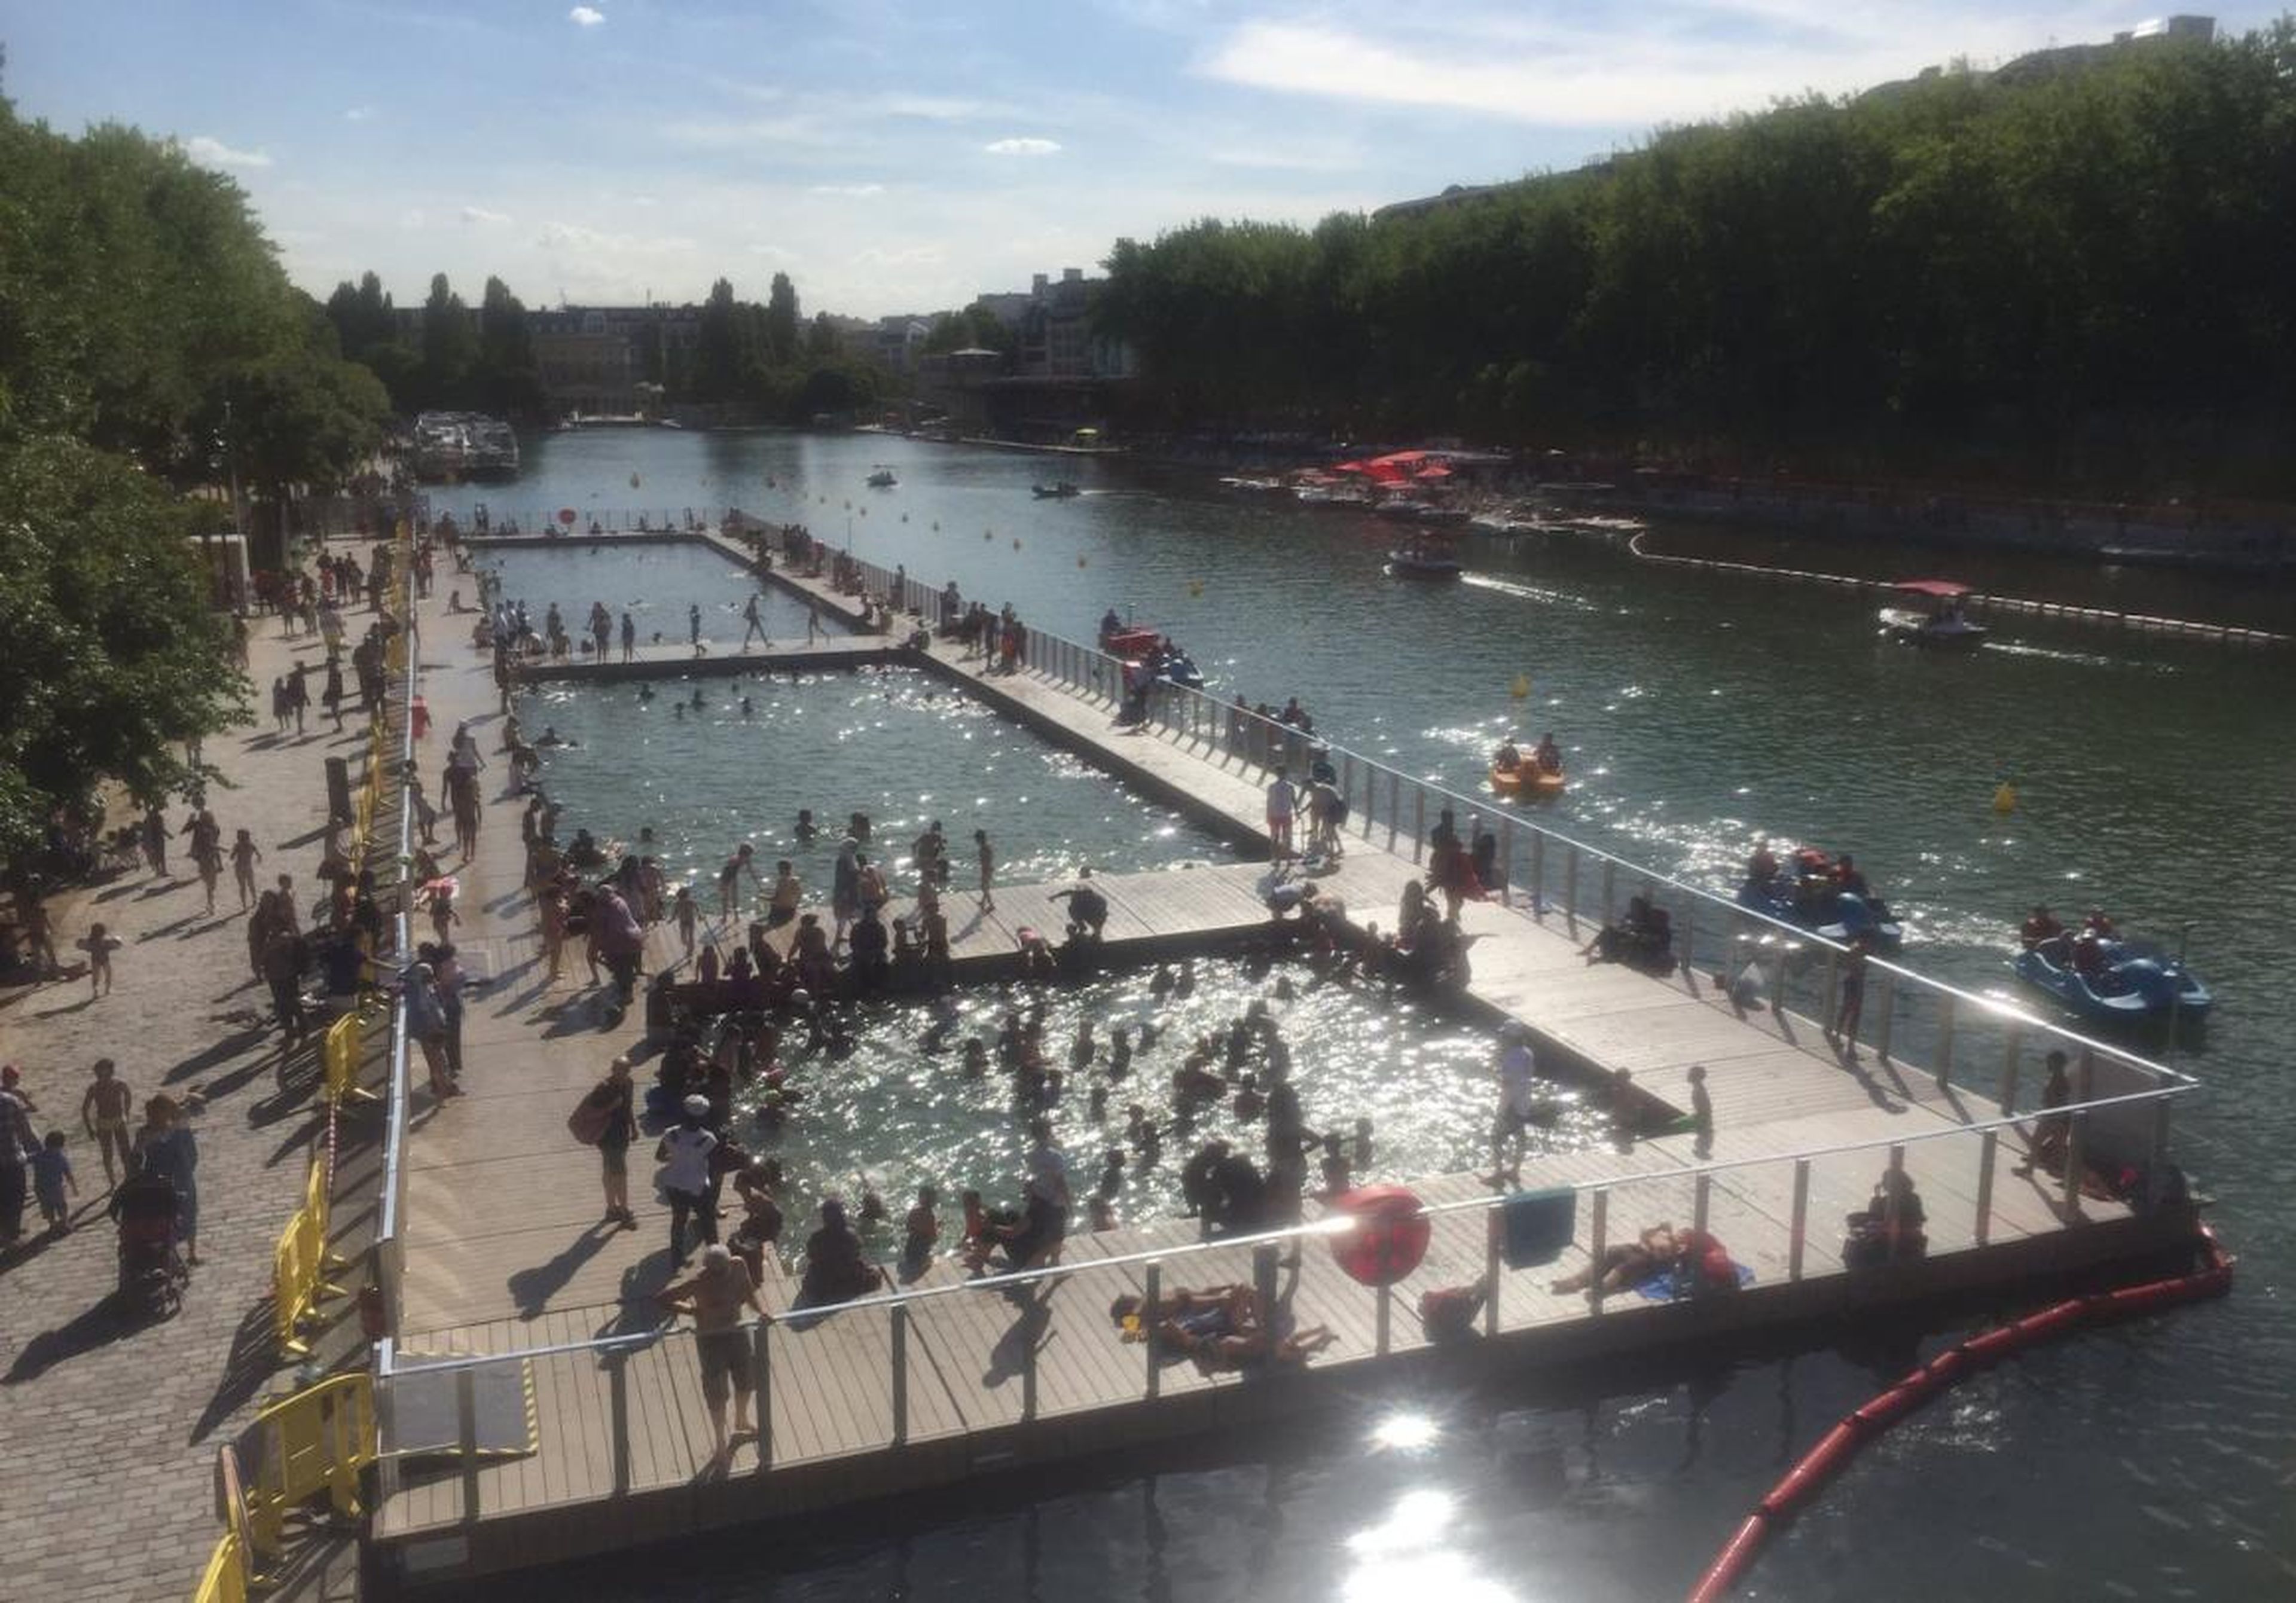 People in the outdoor pool at Paris' La Villette canal in July 2017.